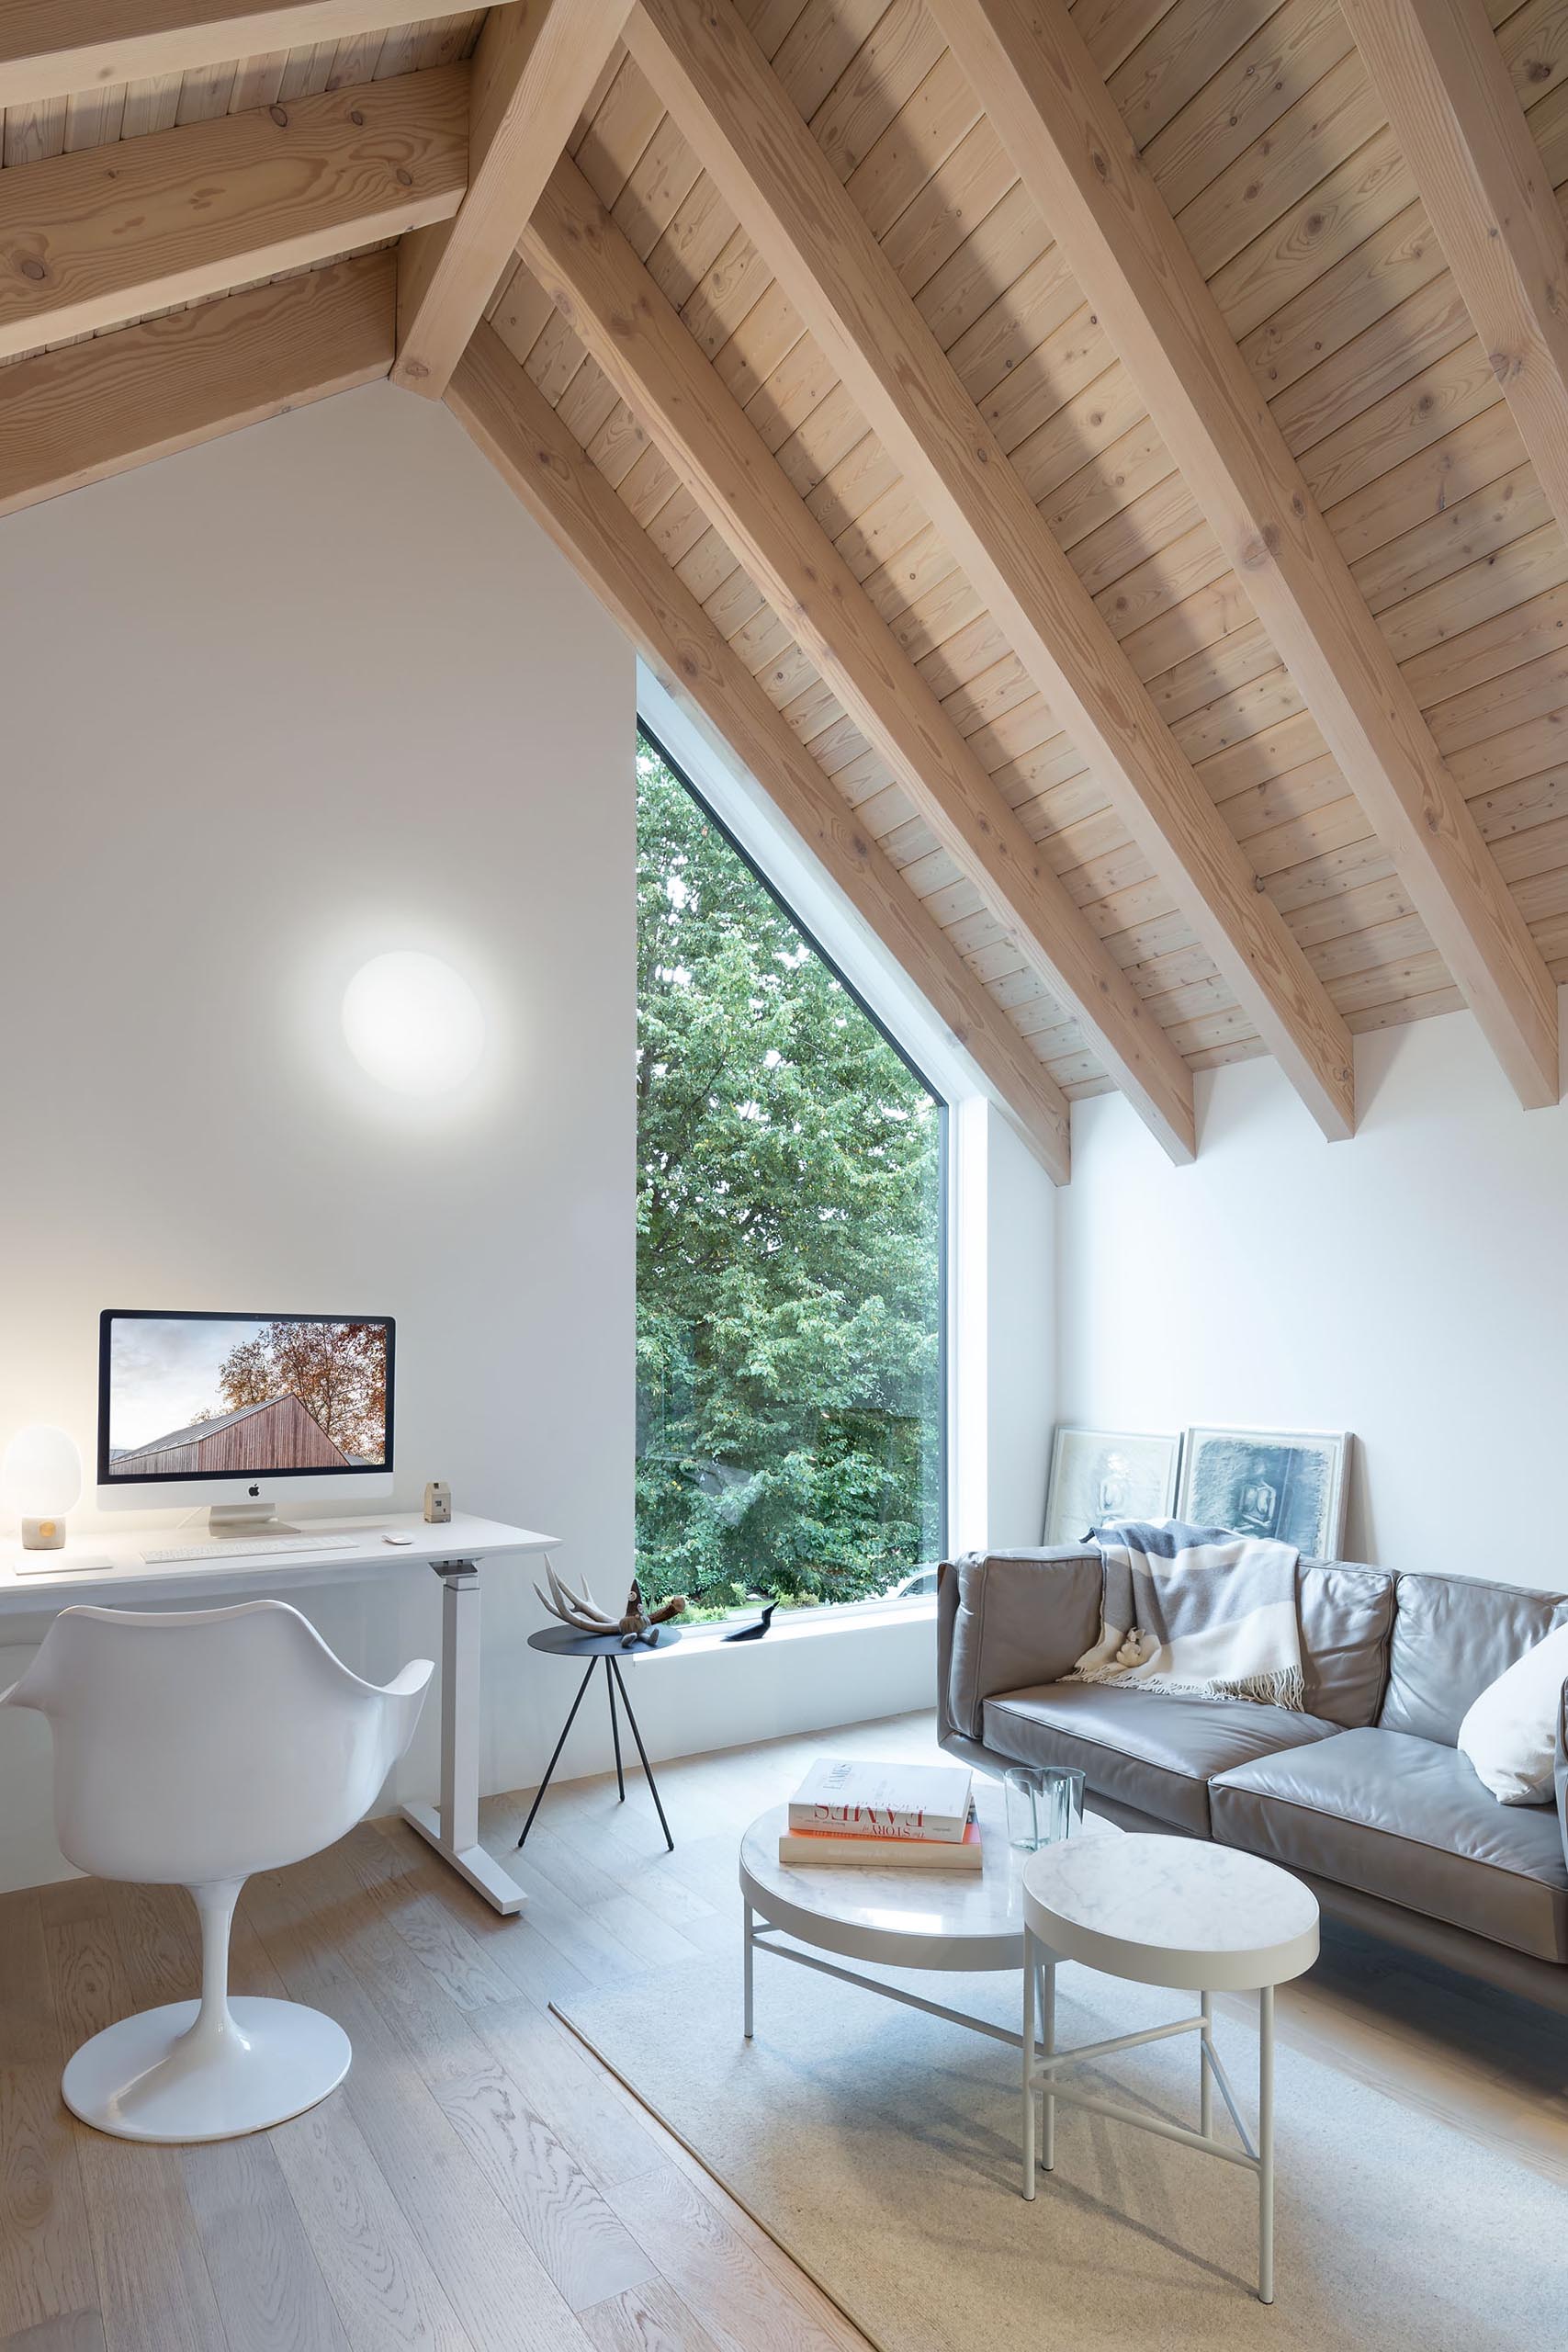 This modern home office includes white walls and a vaulted timber ceiling.